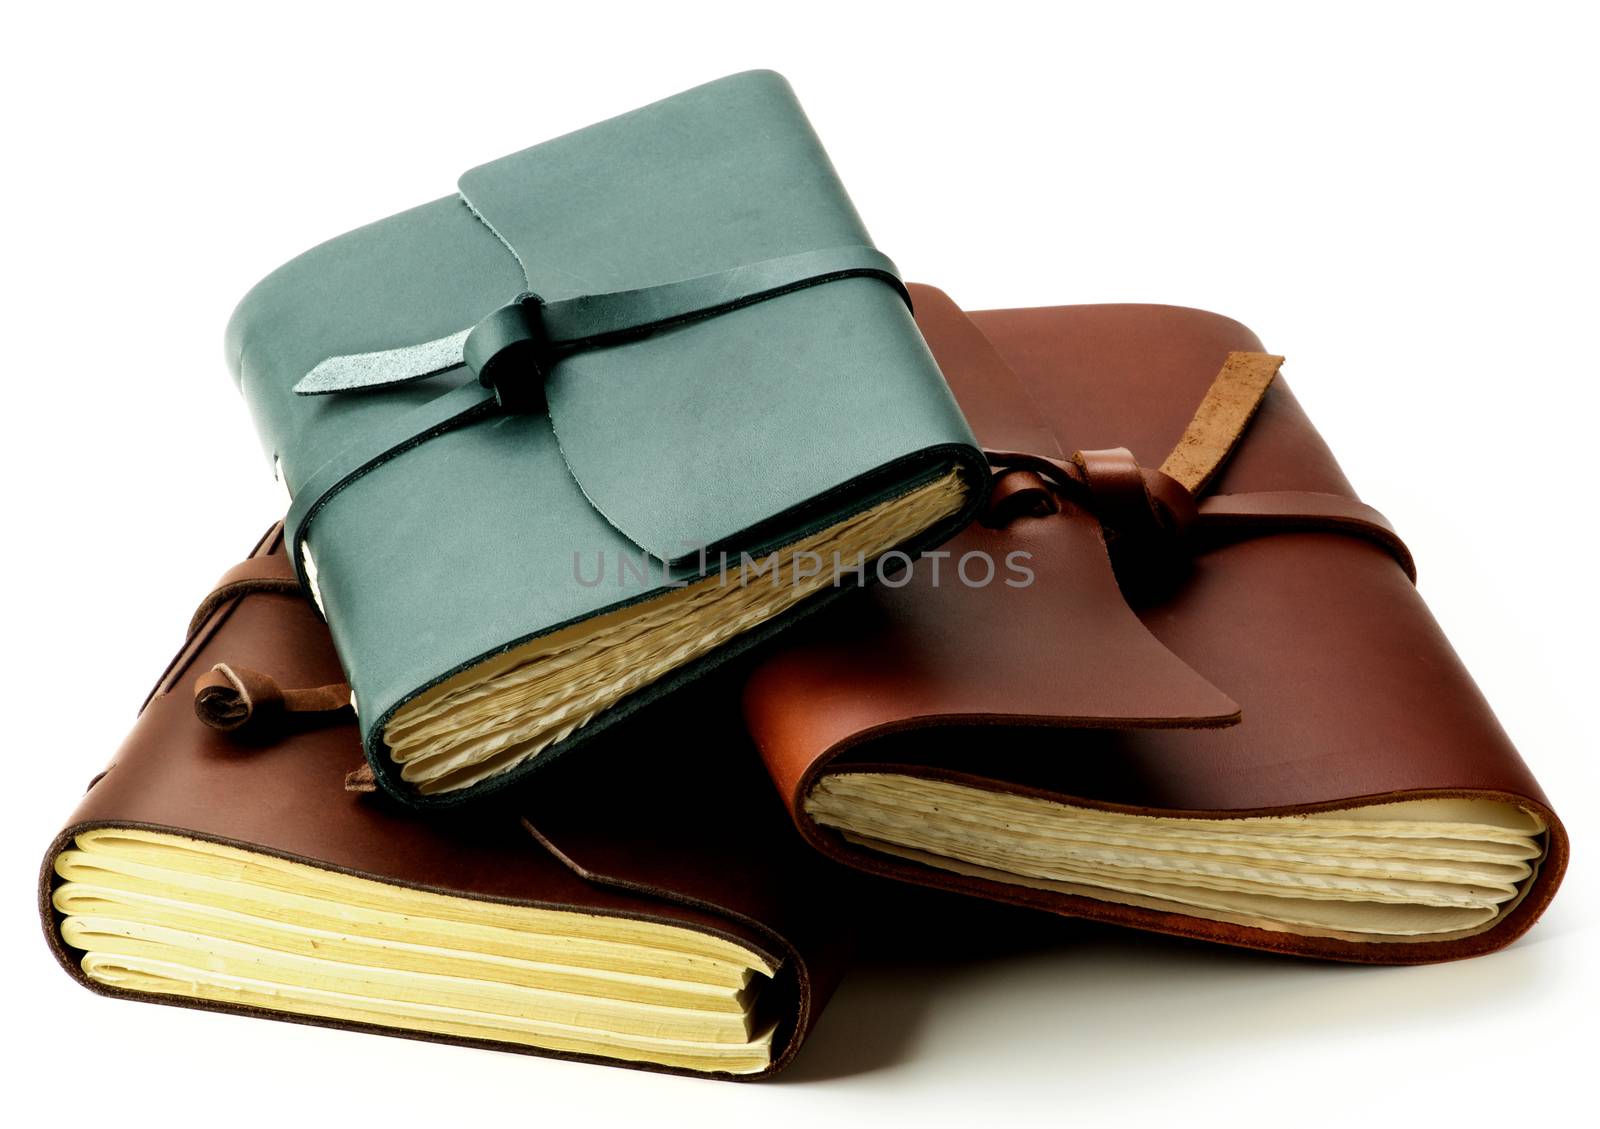 Heap of Various Luxury Handmade Leather Notepads with Craft Paper closeup on White background